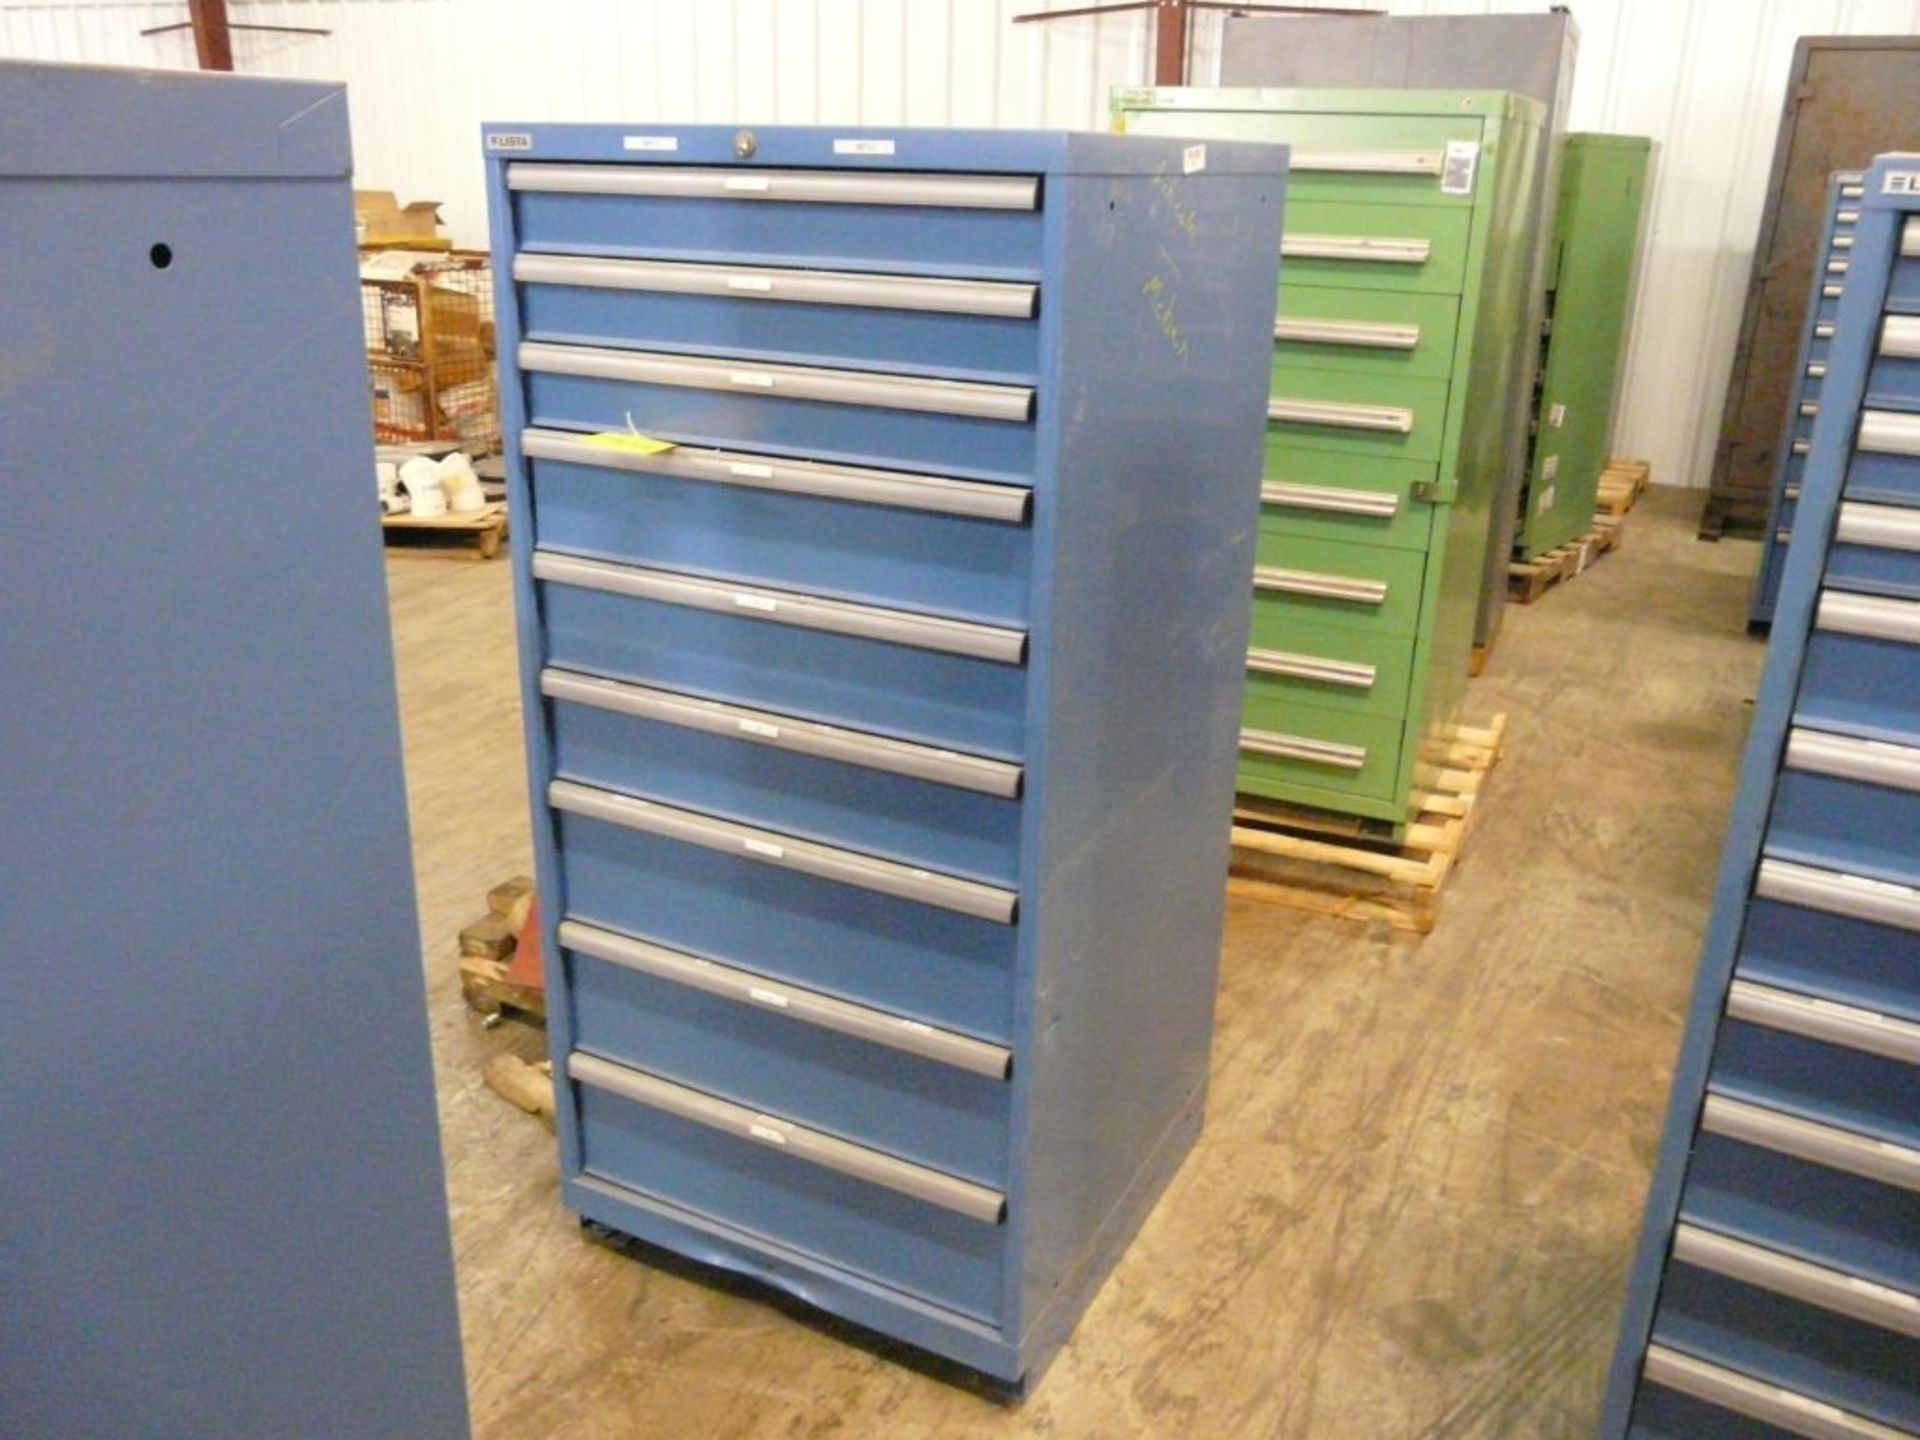 Lista 9-Drawer Cabinet - 28-1/2"W x 28-1/2"L x 59-1/2"H; Tag: 218666 - Image 2 of 4